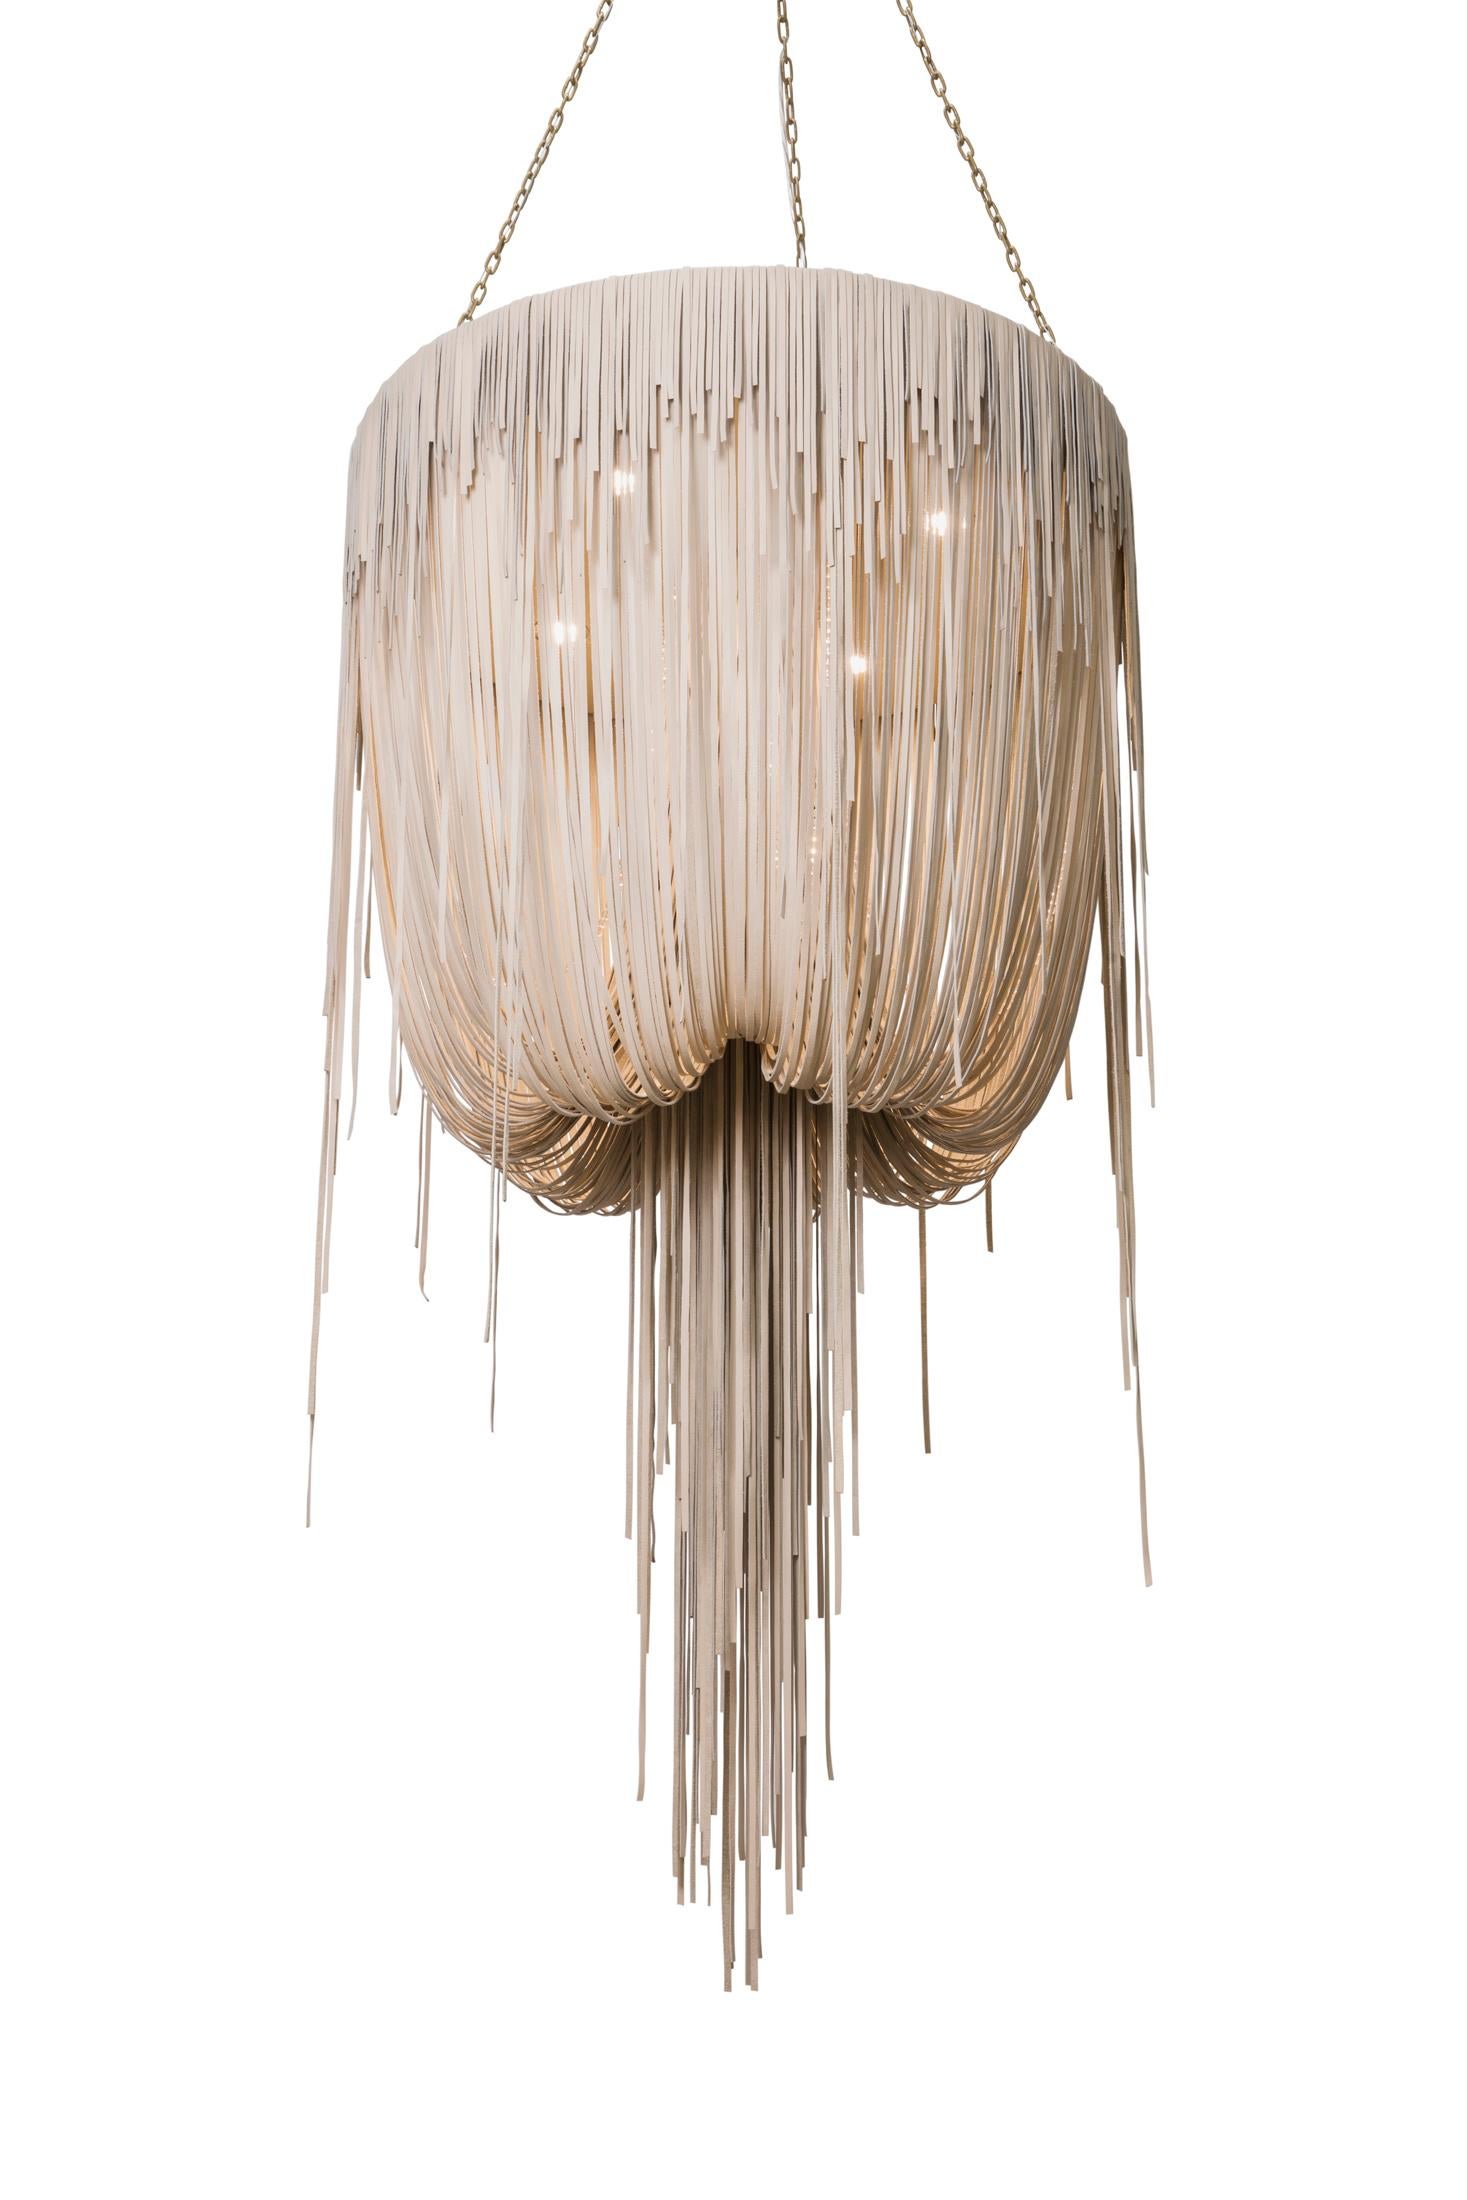 Urchin Leather Chandelier, Medium in Cream-Stone Leather For Sale 3